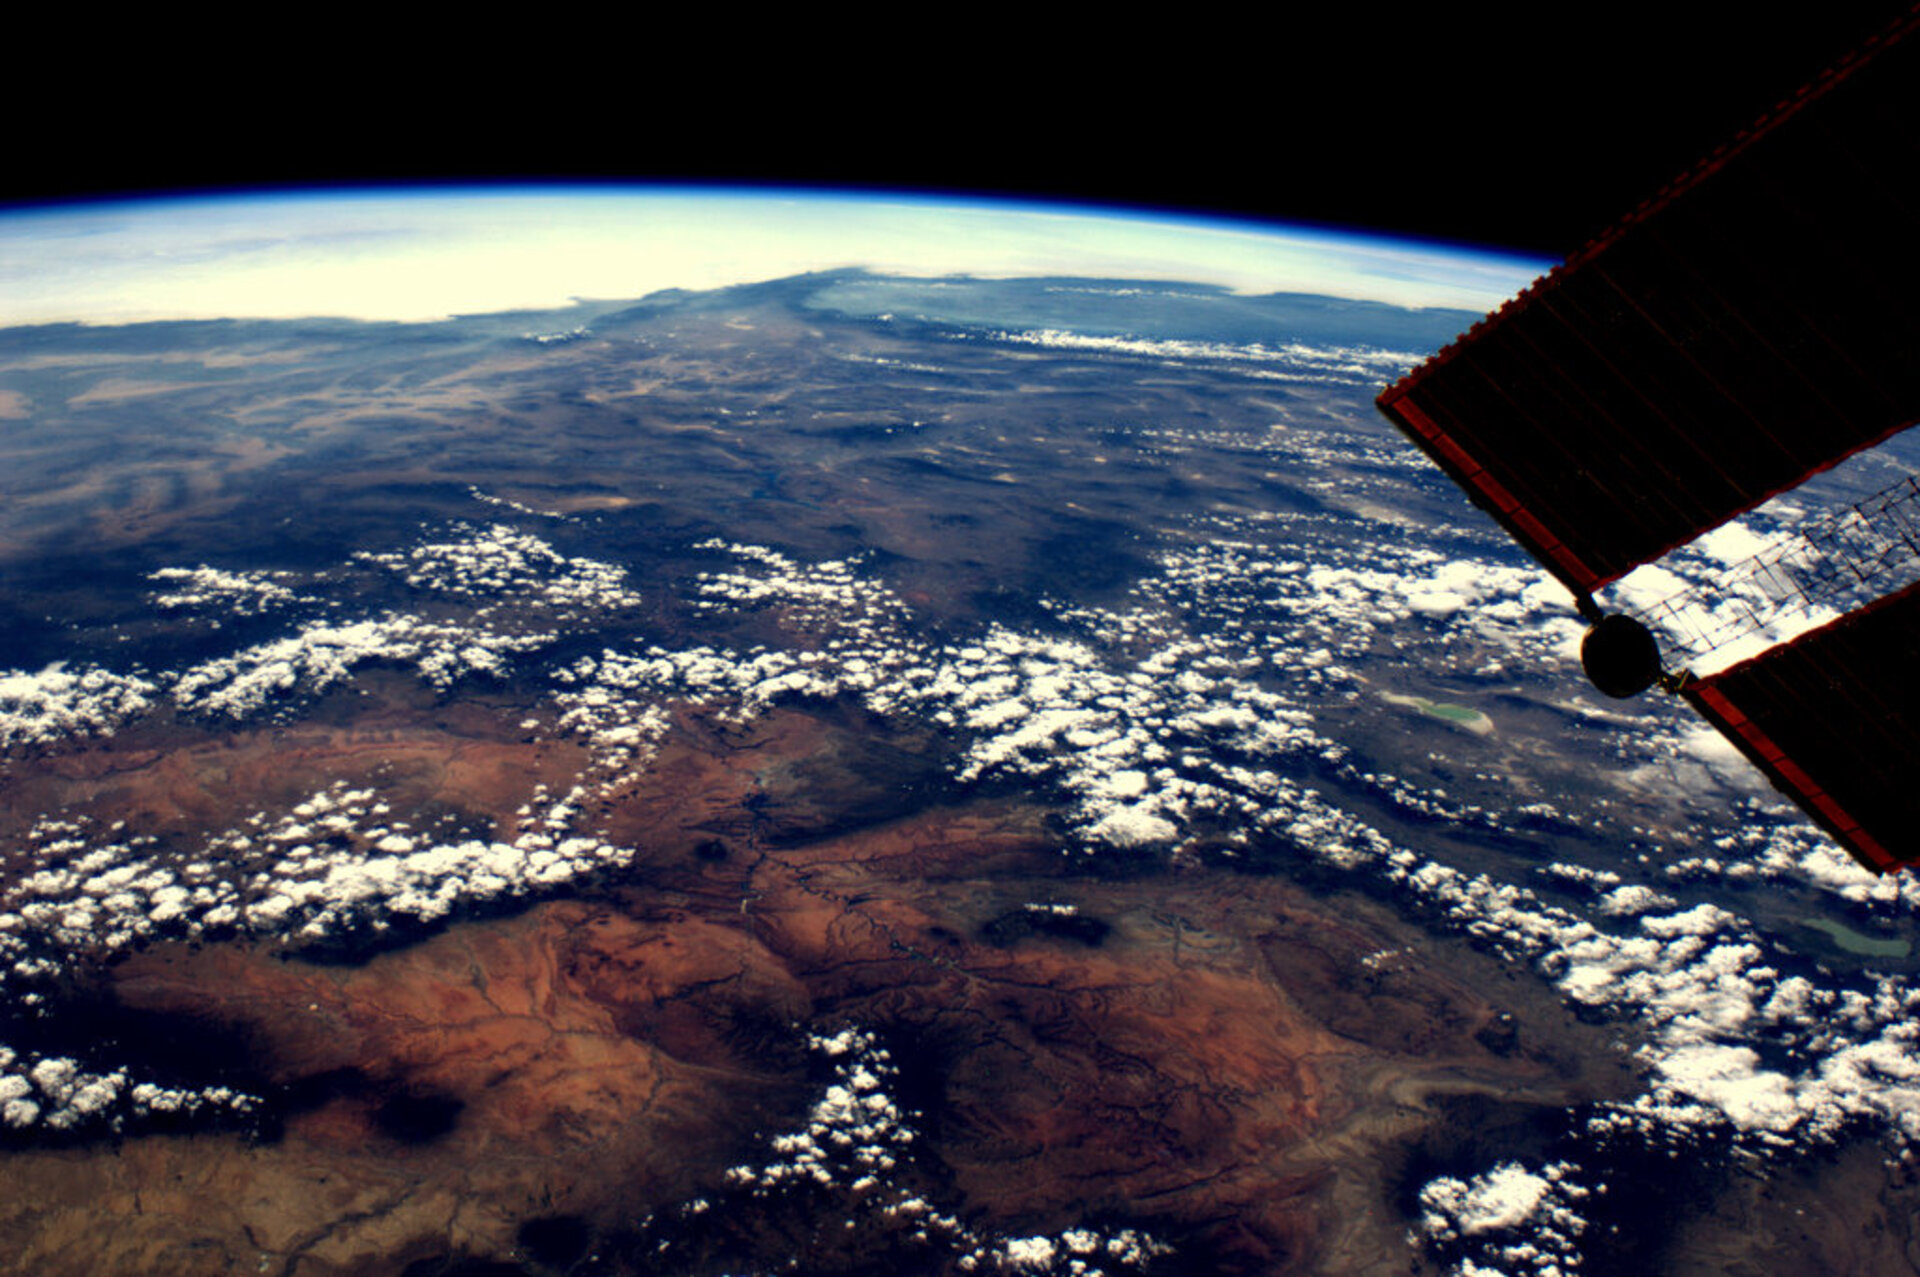 Monument Valley, Las Vegas and the Colorado river, seen from the ISS